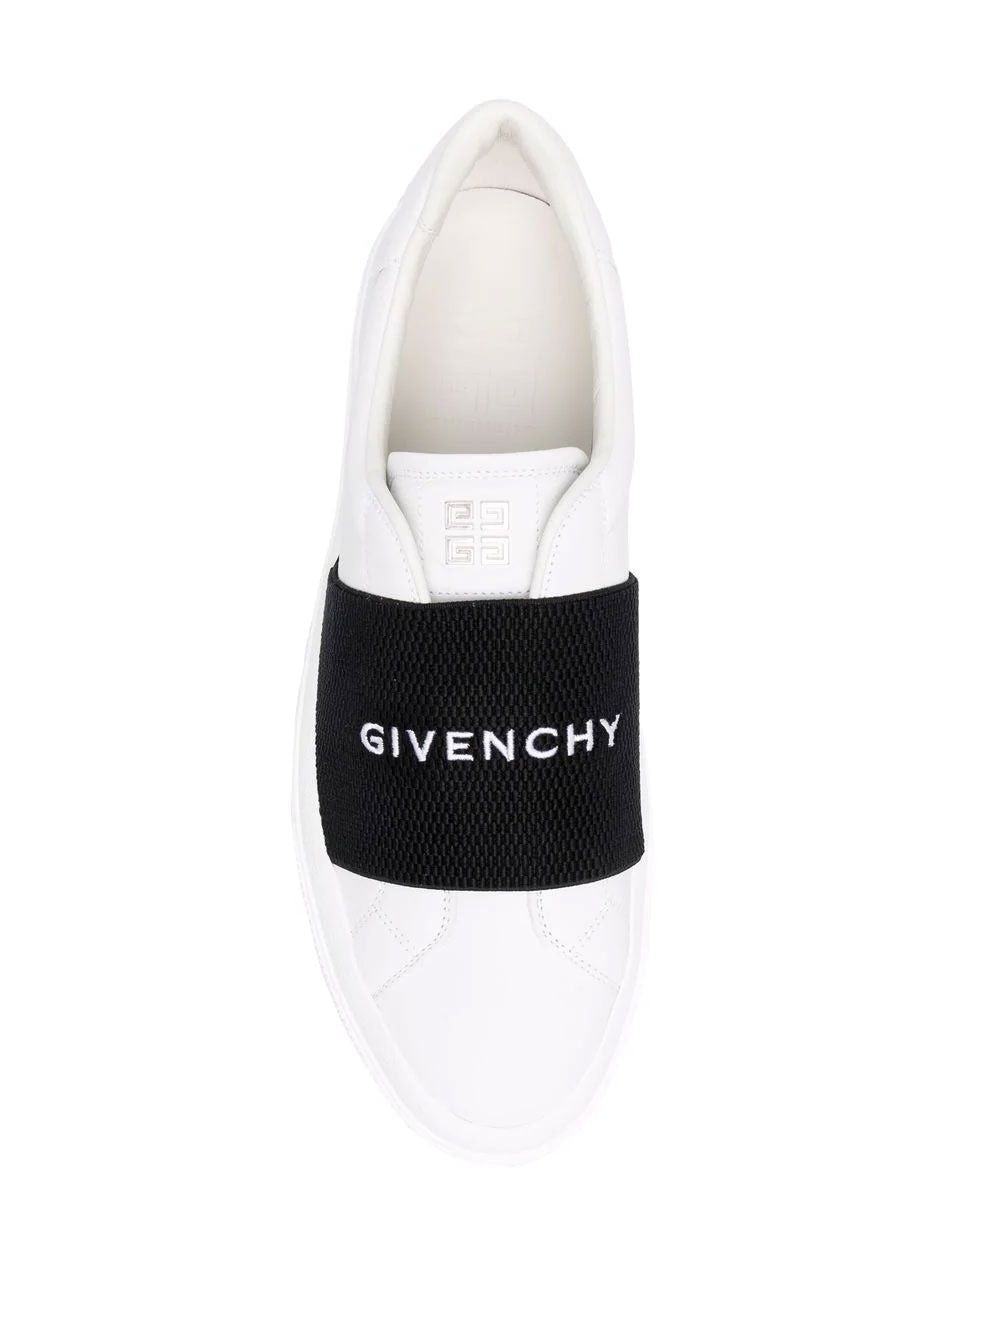 GIVENCHY City Sport Leather Slip-On Sneakers for Men